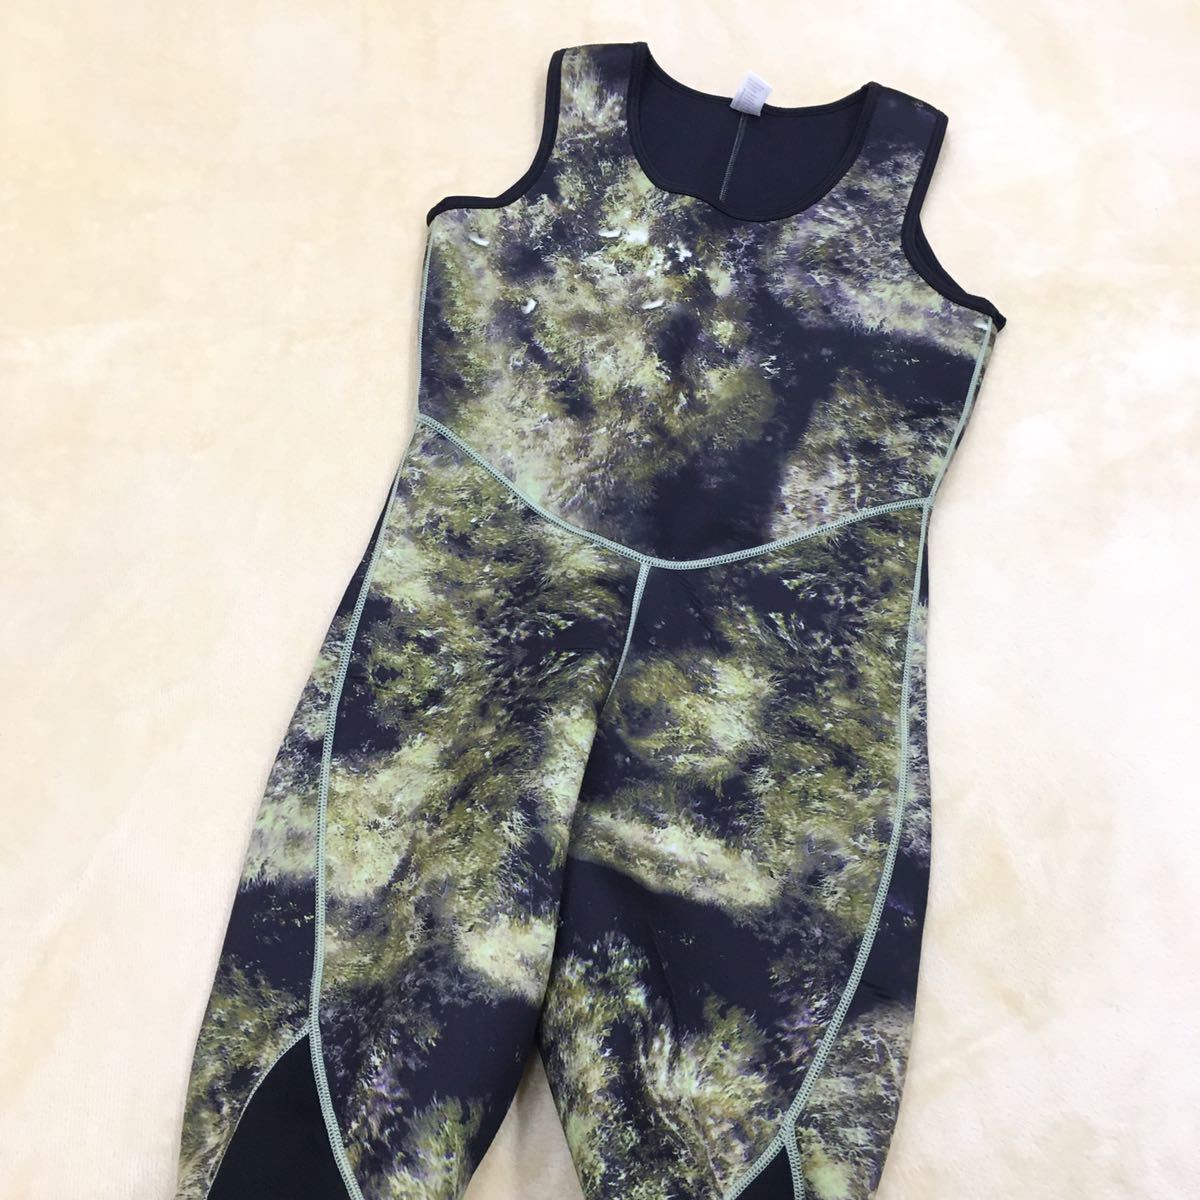 MYLEDI Neo pre n3mm thickness super stretch wet suit camouflage -ju full suit shuno-ke ring men's top and bottom size XL